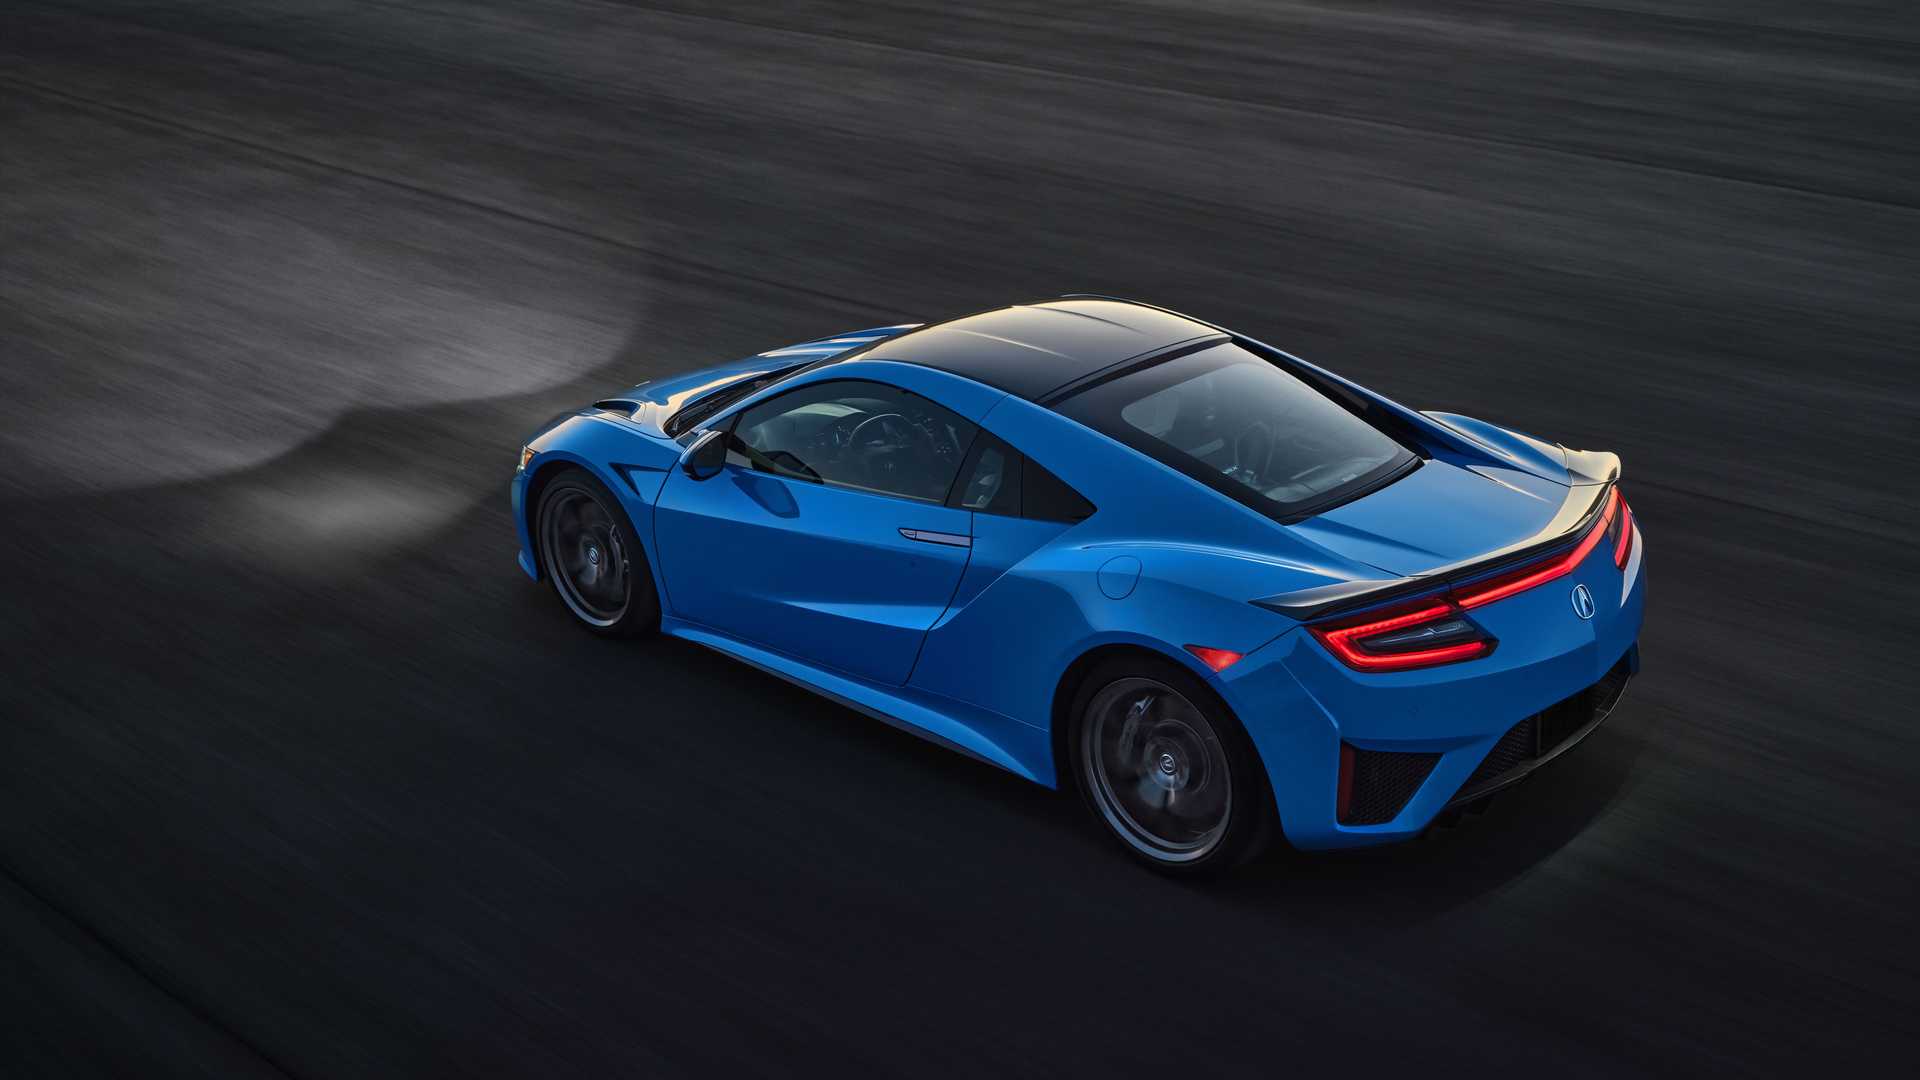 A total of 300 units of the Acura NSX TYpe S were sold in just 24 hours.